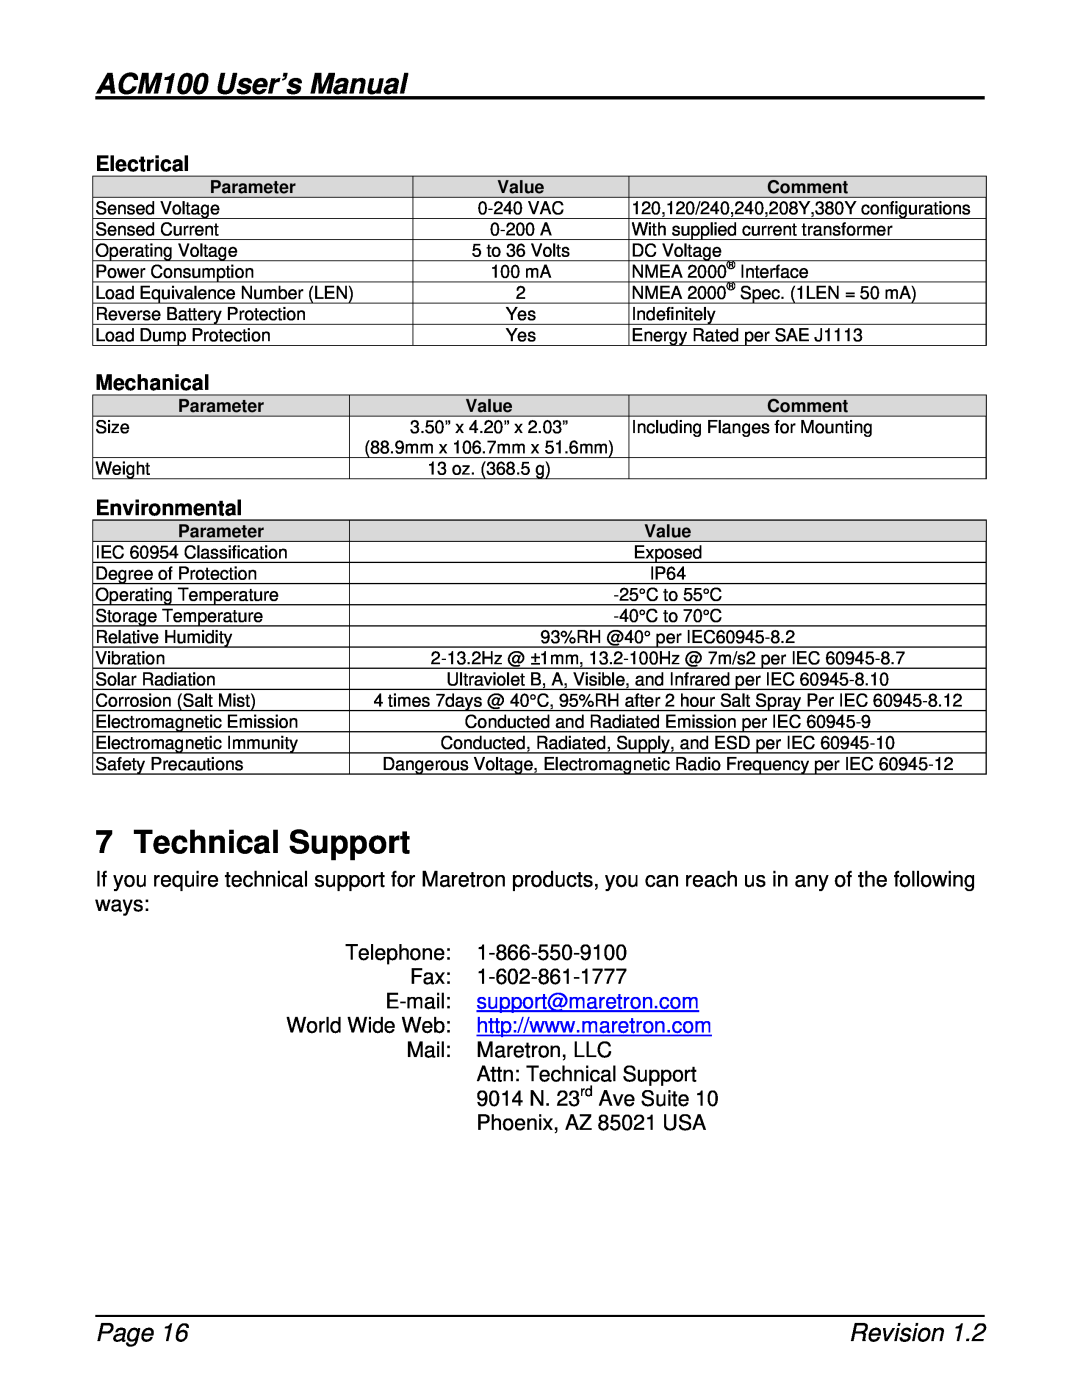 Maretron user manual Technical Support, Electrical, Mechanical, Environmental, ACM100 User’s Manual, Page, Revision 